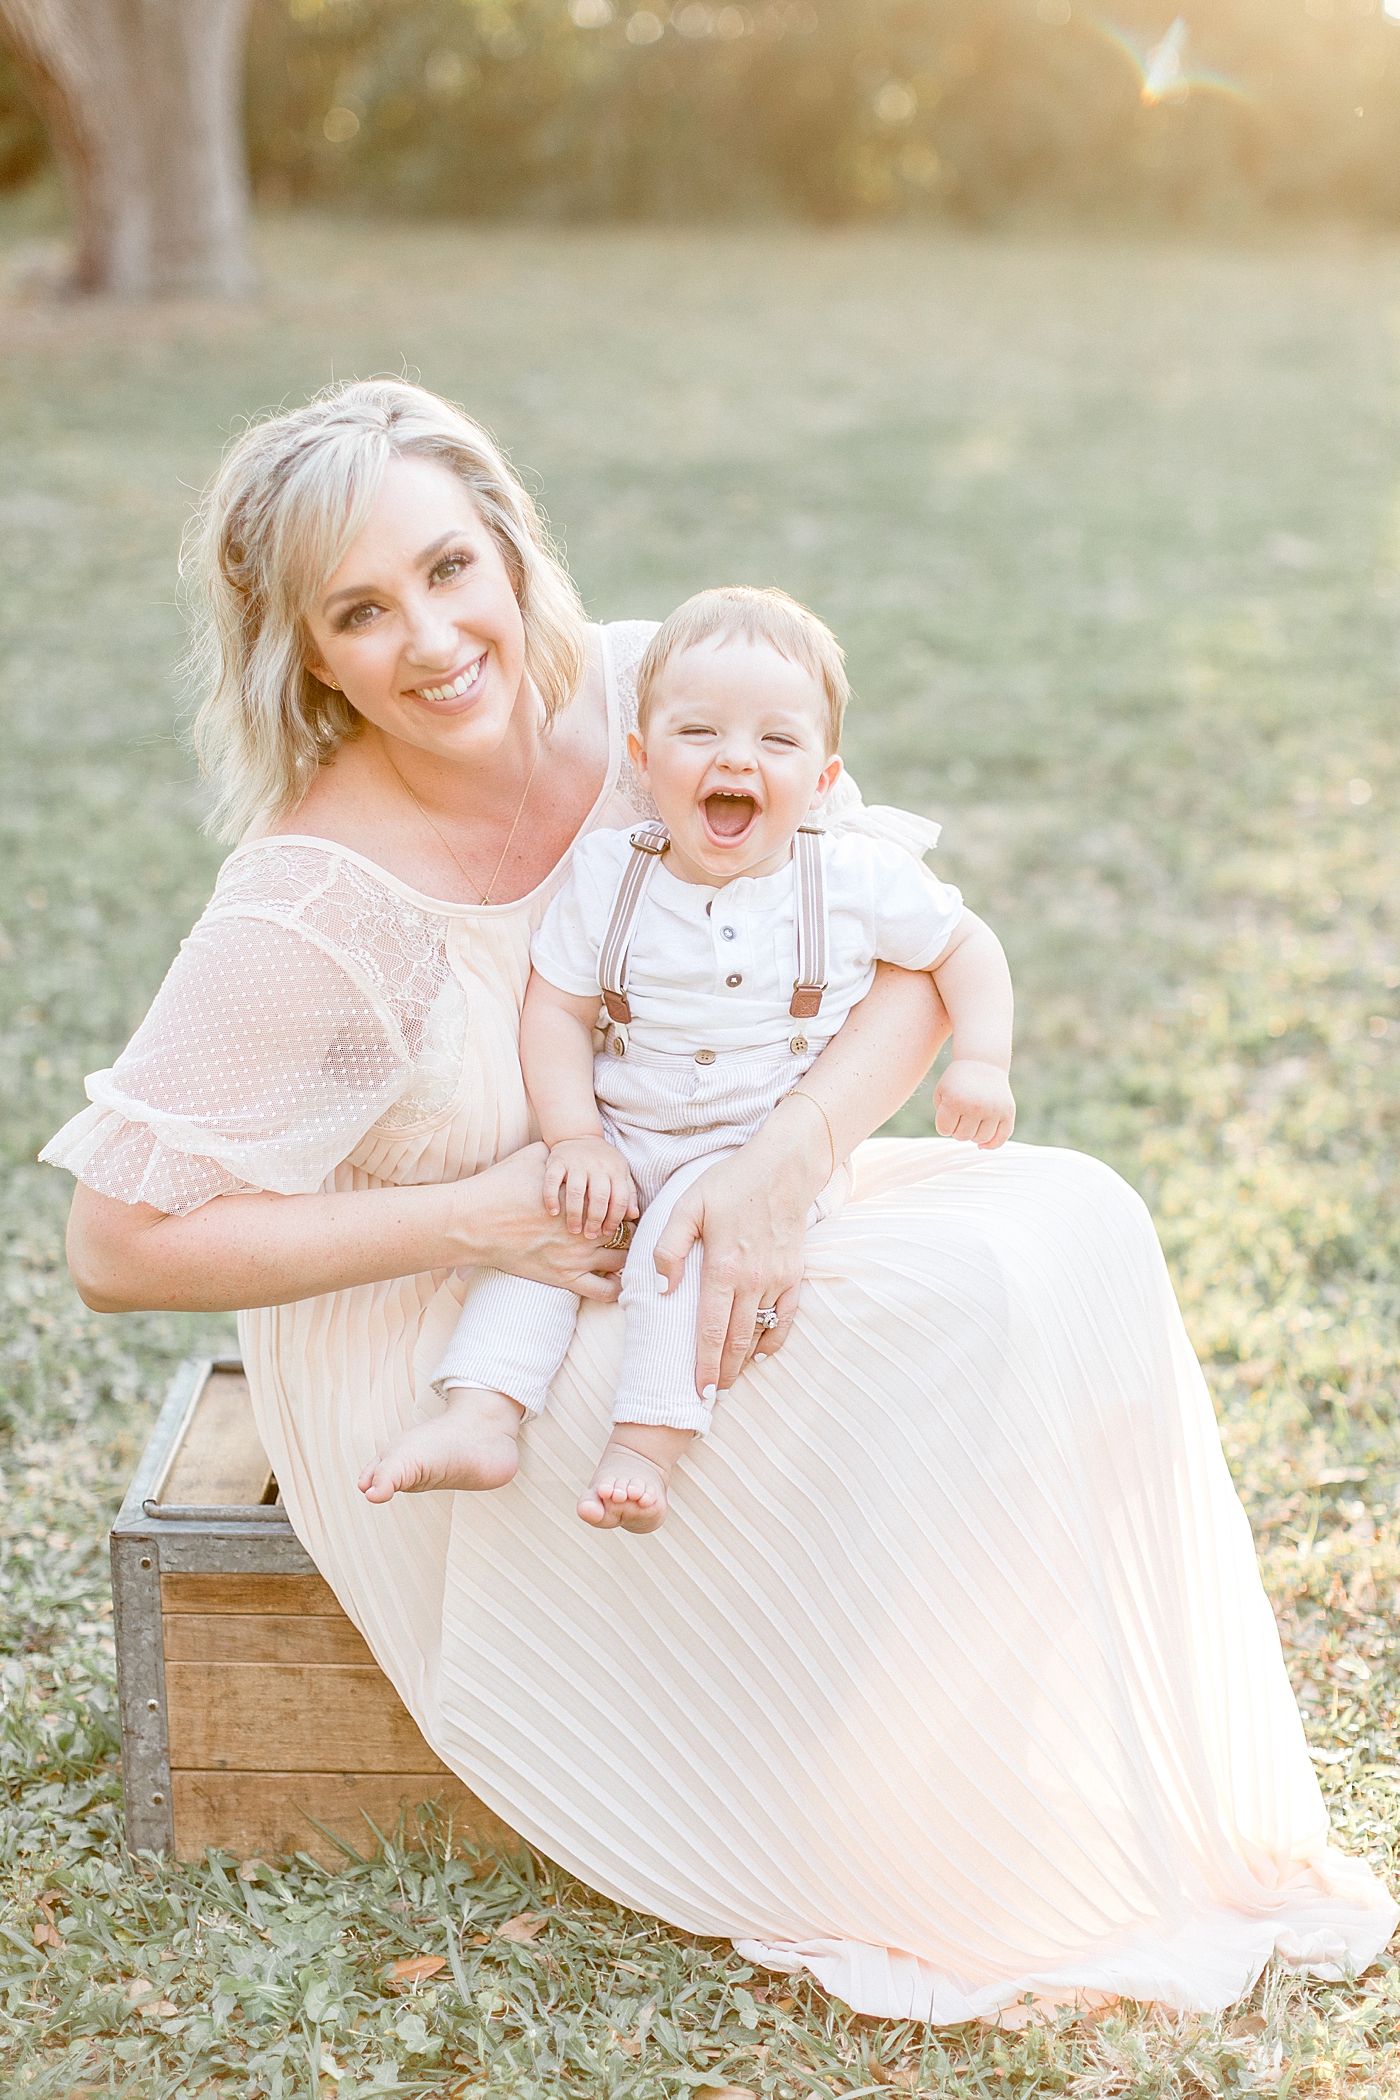 Sunset photoshoot with Mom and her one year old son. Photo by Brittany Elise Photography.